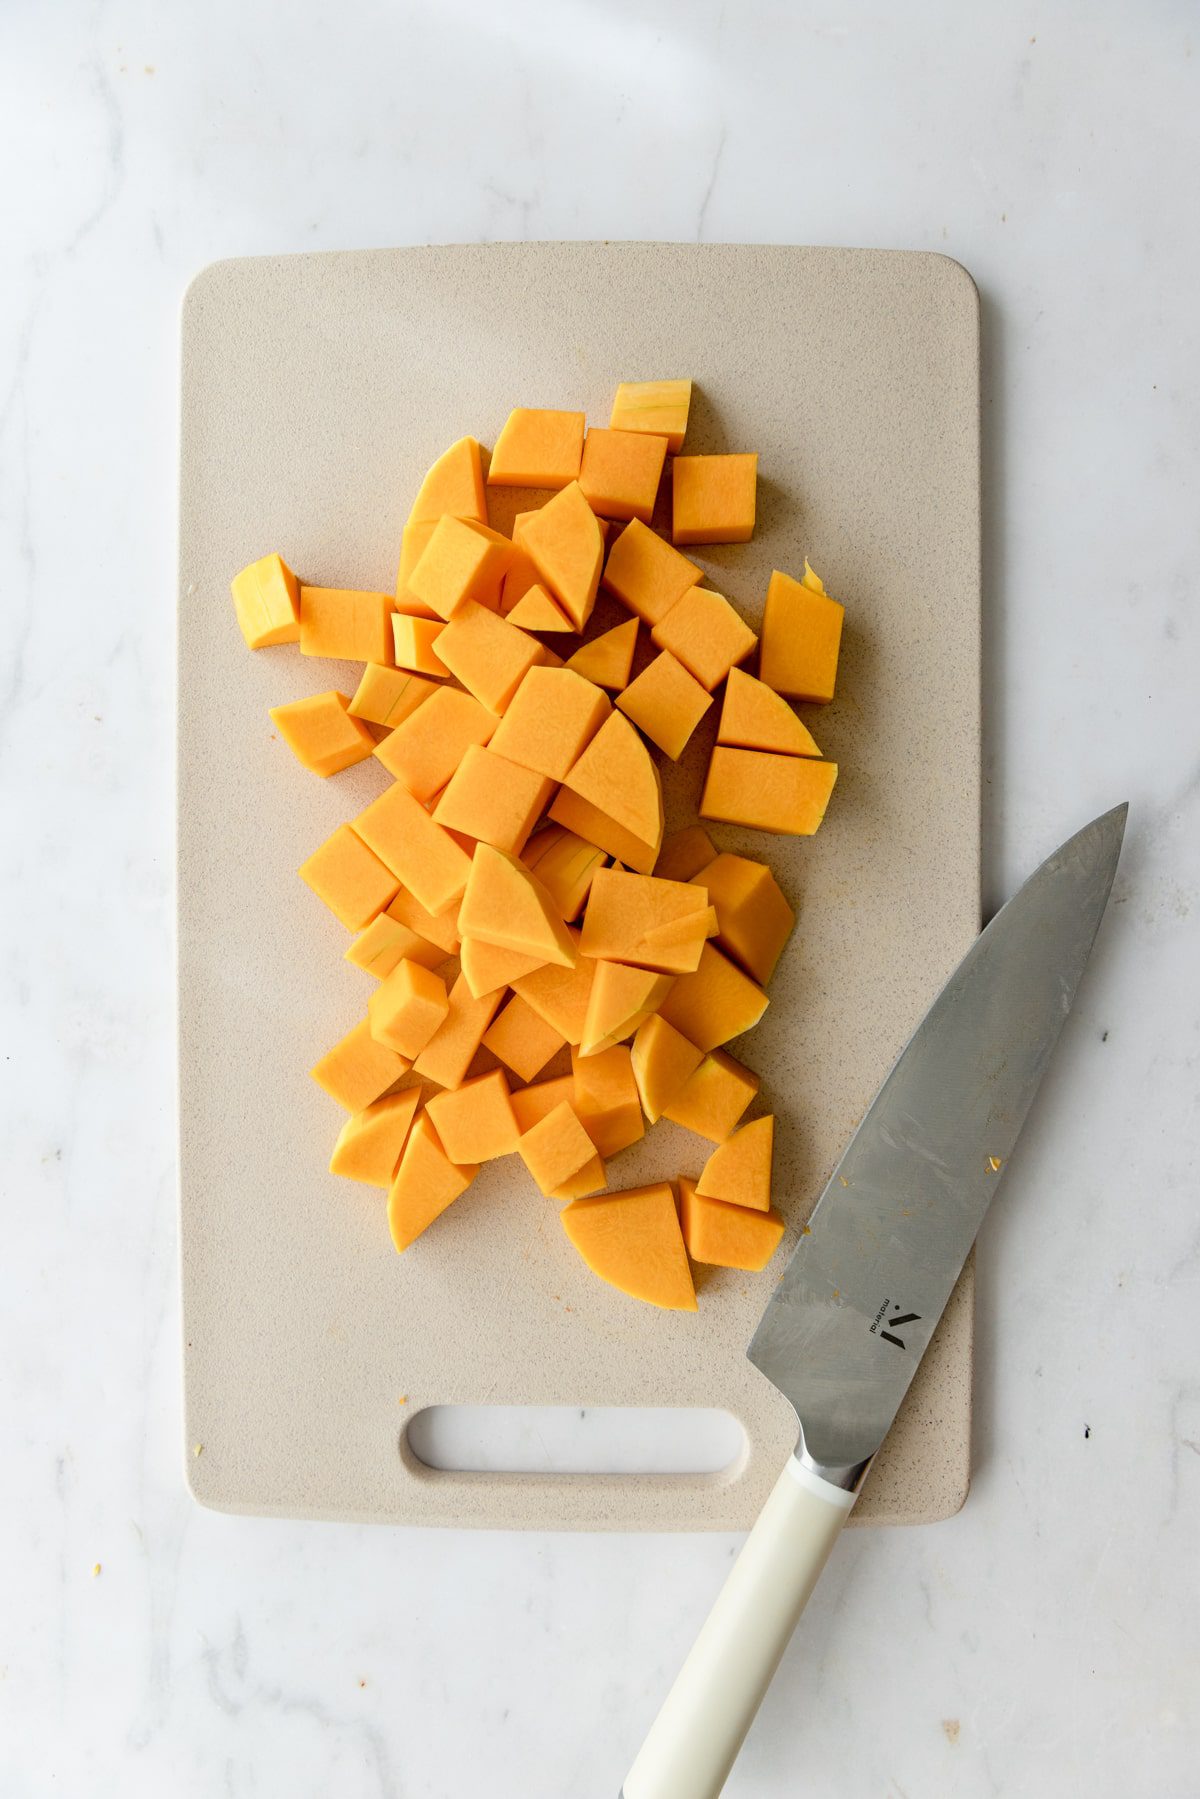 Diced butternut squash on a cutting board next to a knife.